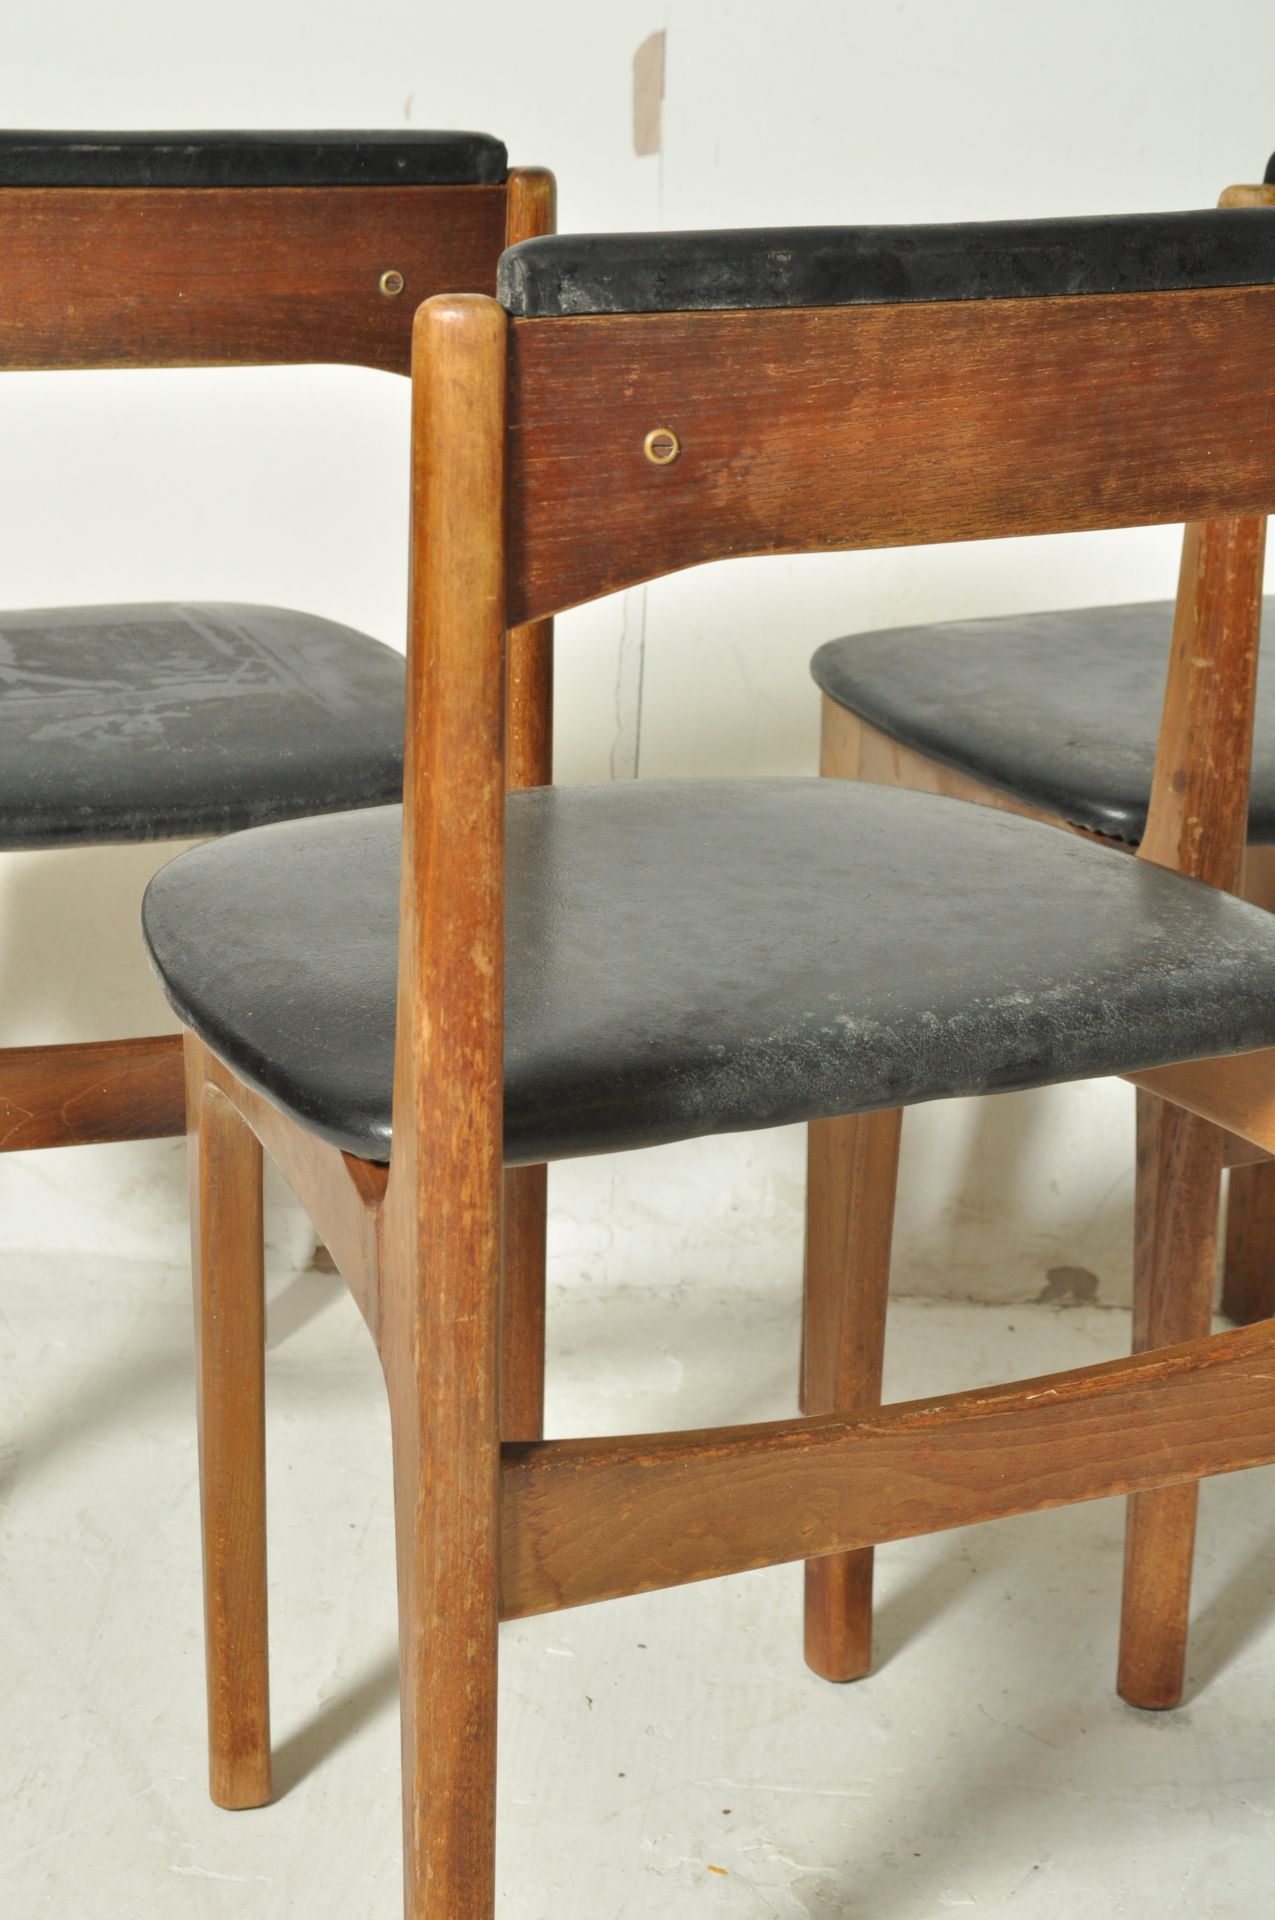 FOUR DANISH INSPIRED TEAK WOOD AND BLACK VINYL DINING CHAIRS - Image 6 of 6